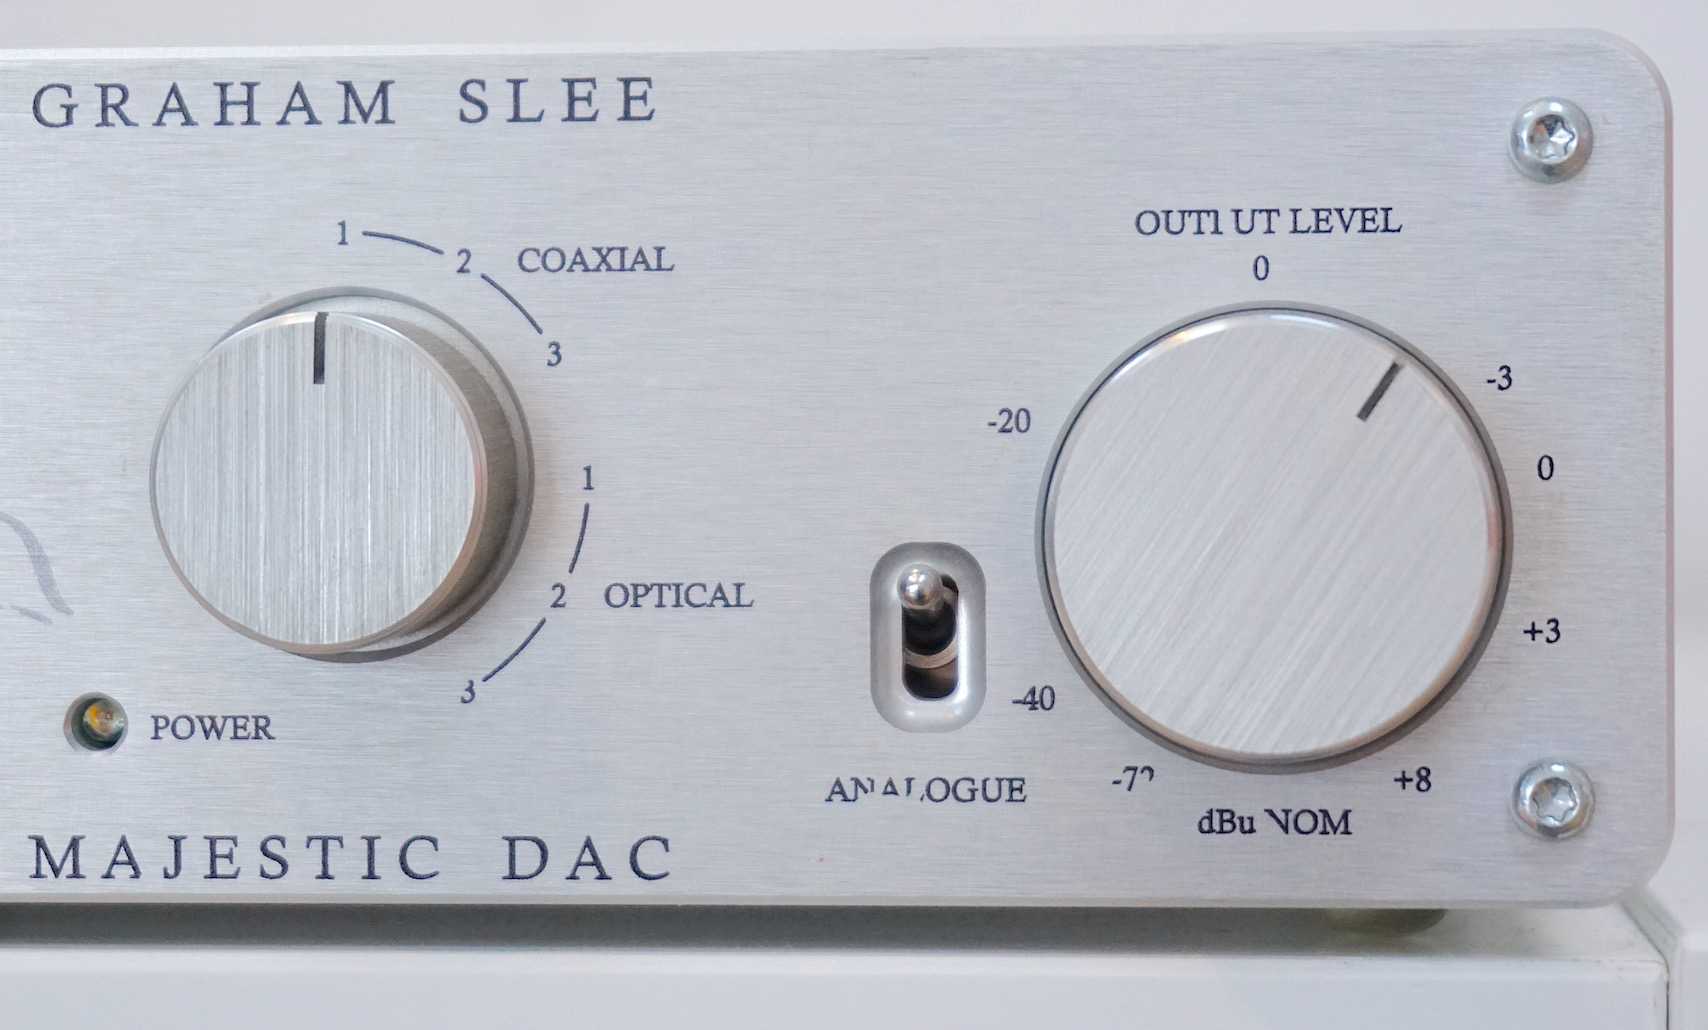 MAJESTIC DAC FROM GRAHAM SLEE